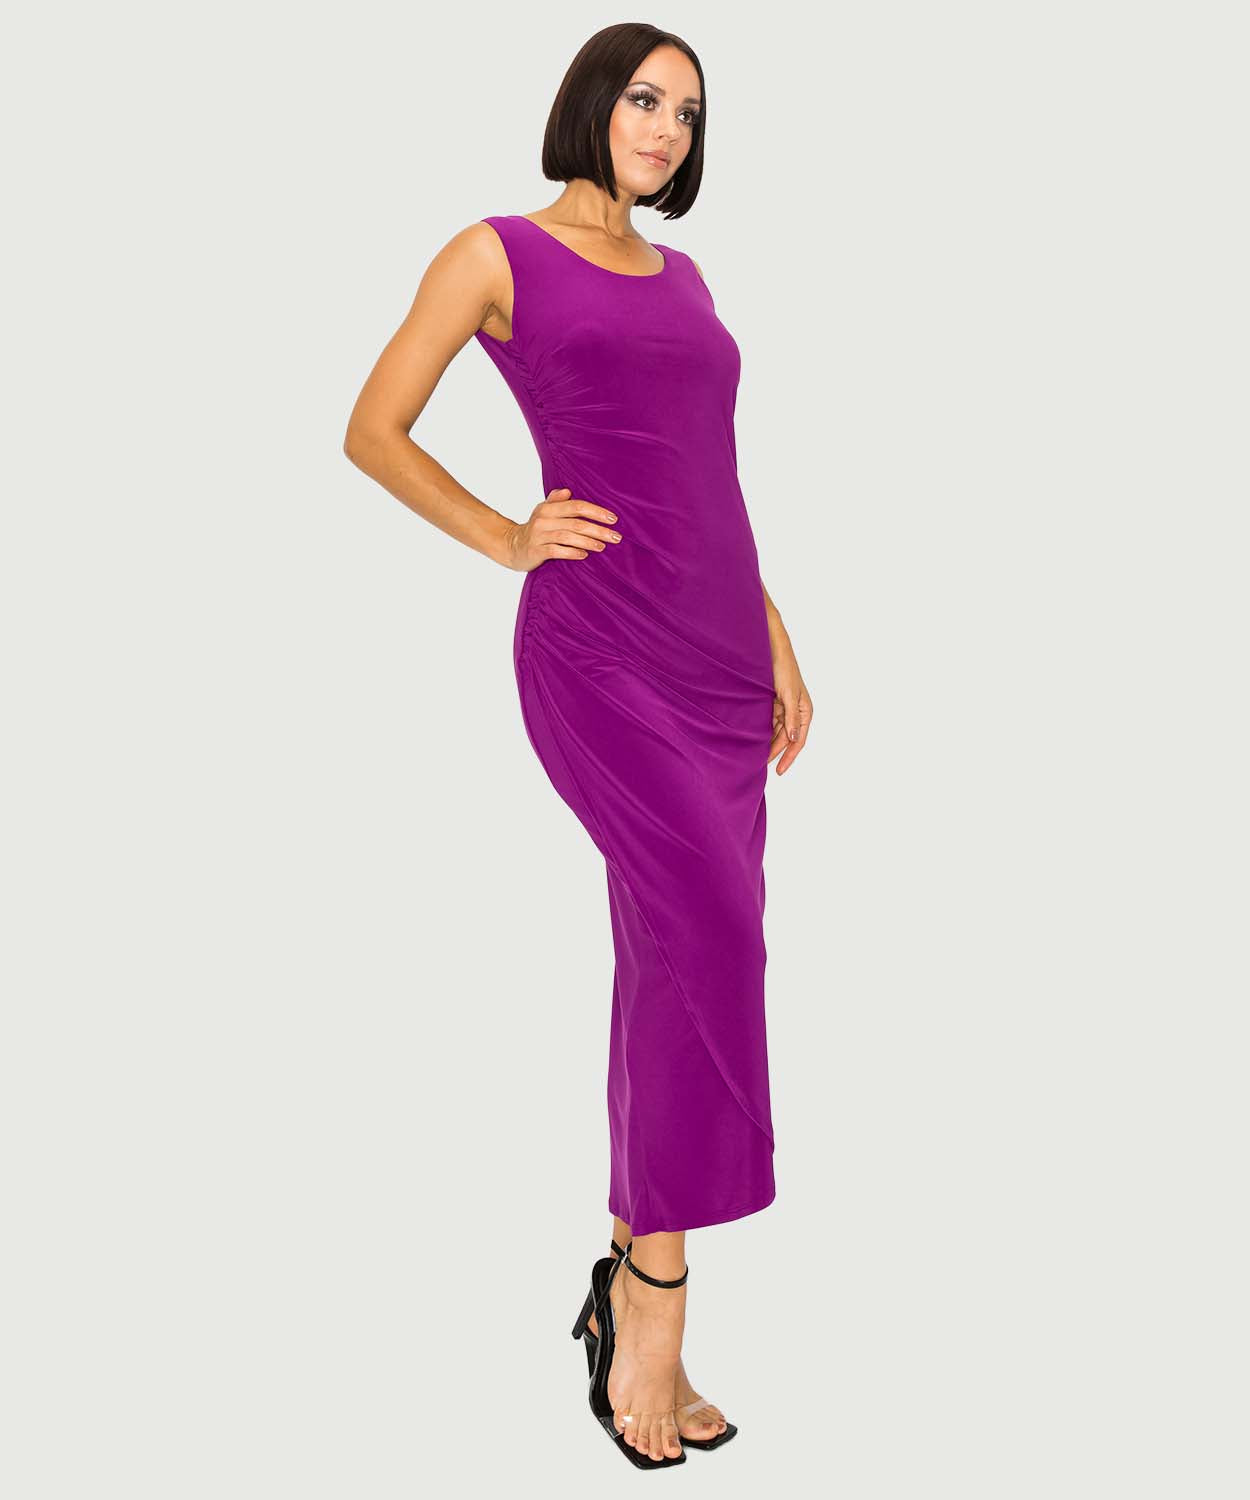 Double Scoop Tank Dress with Side Ruching